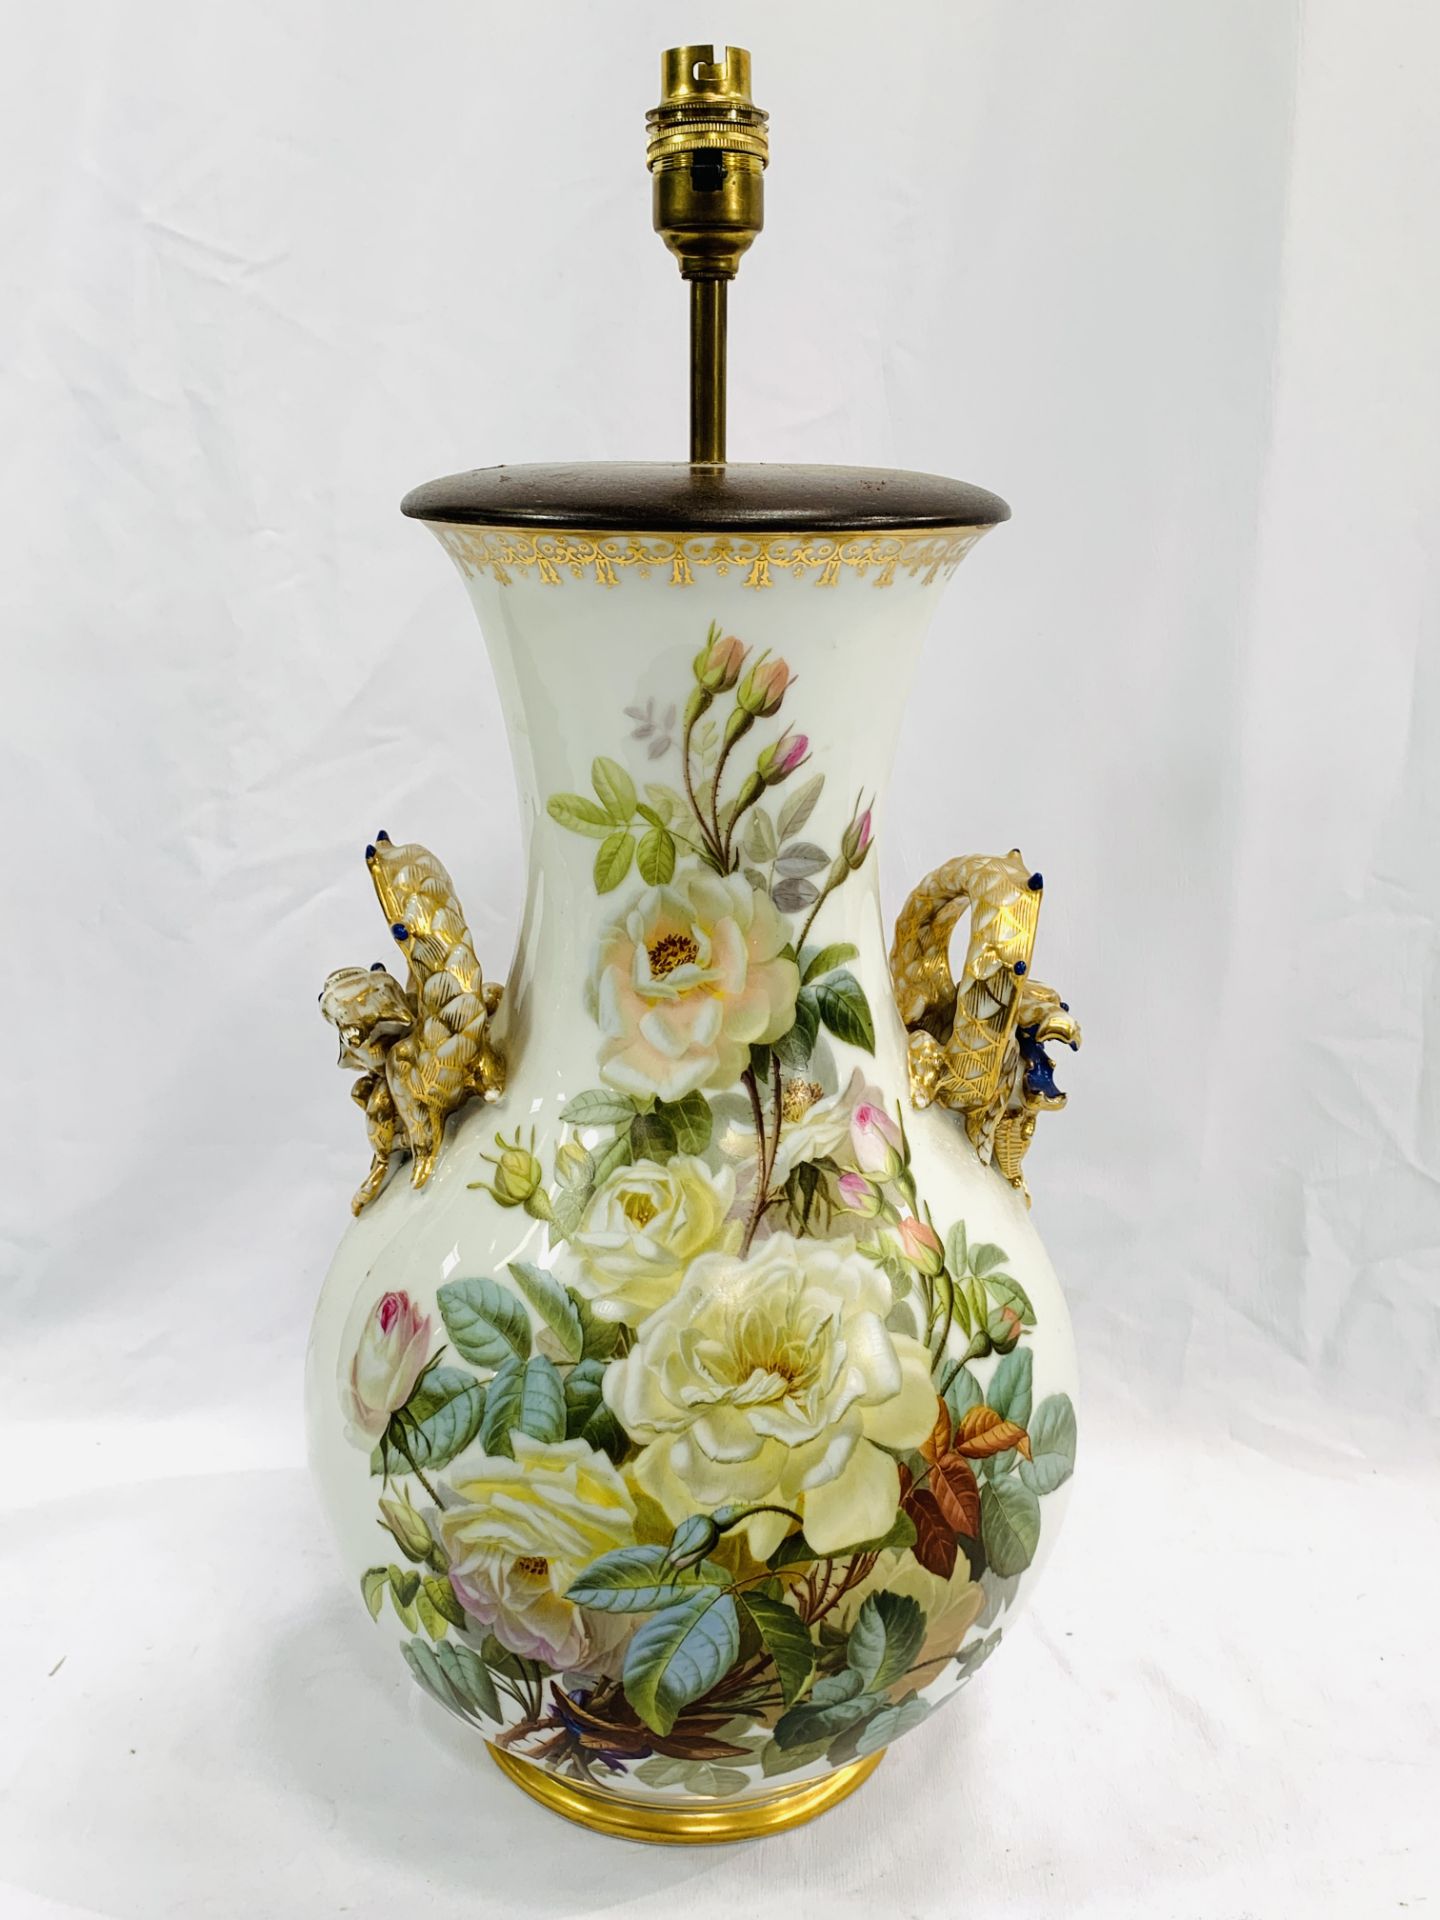 A hand painted lamp base